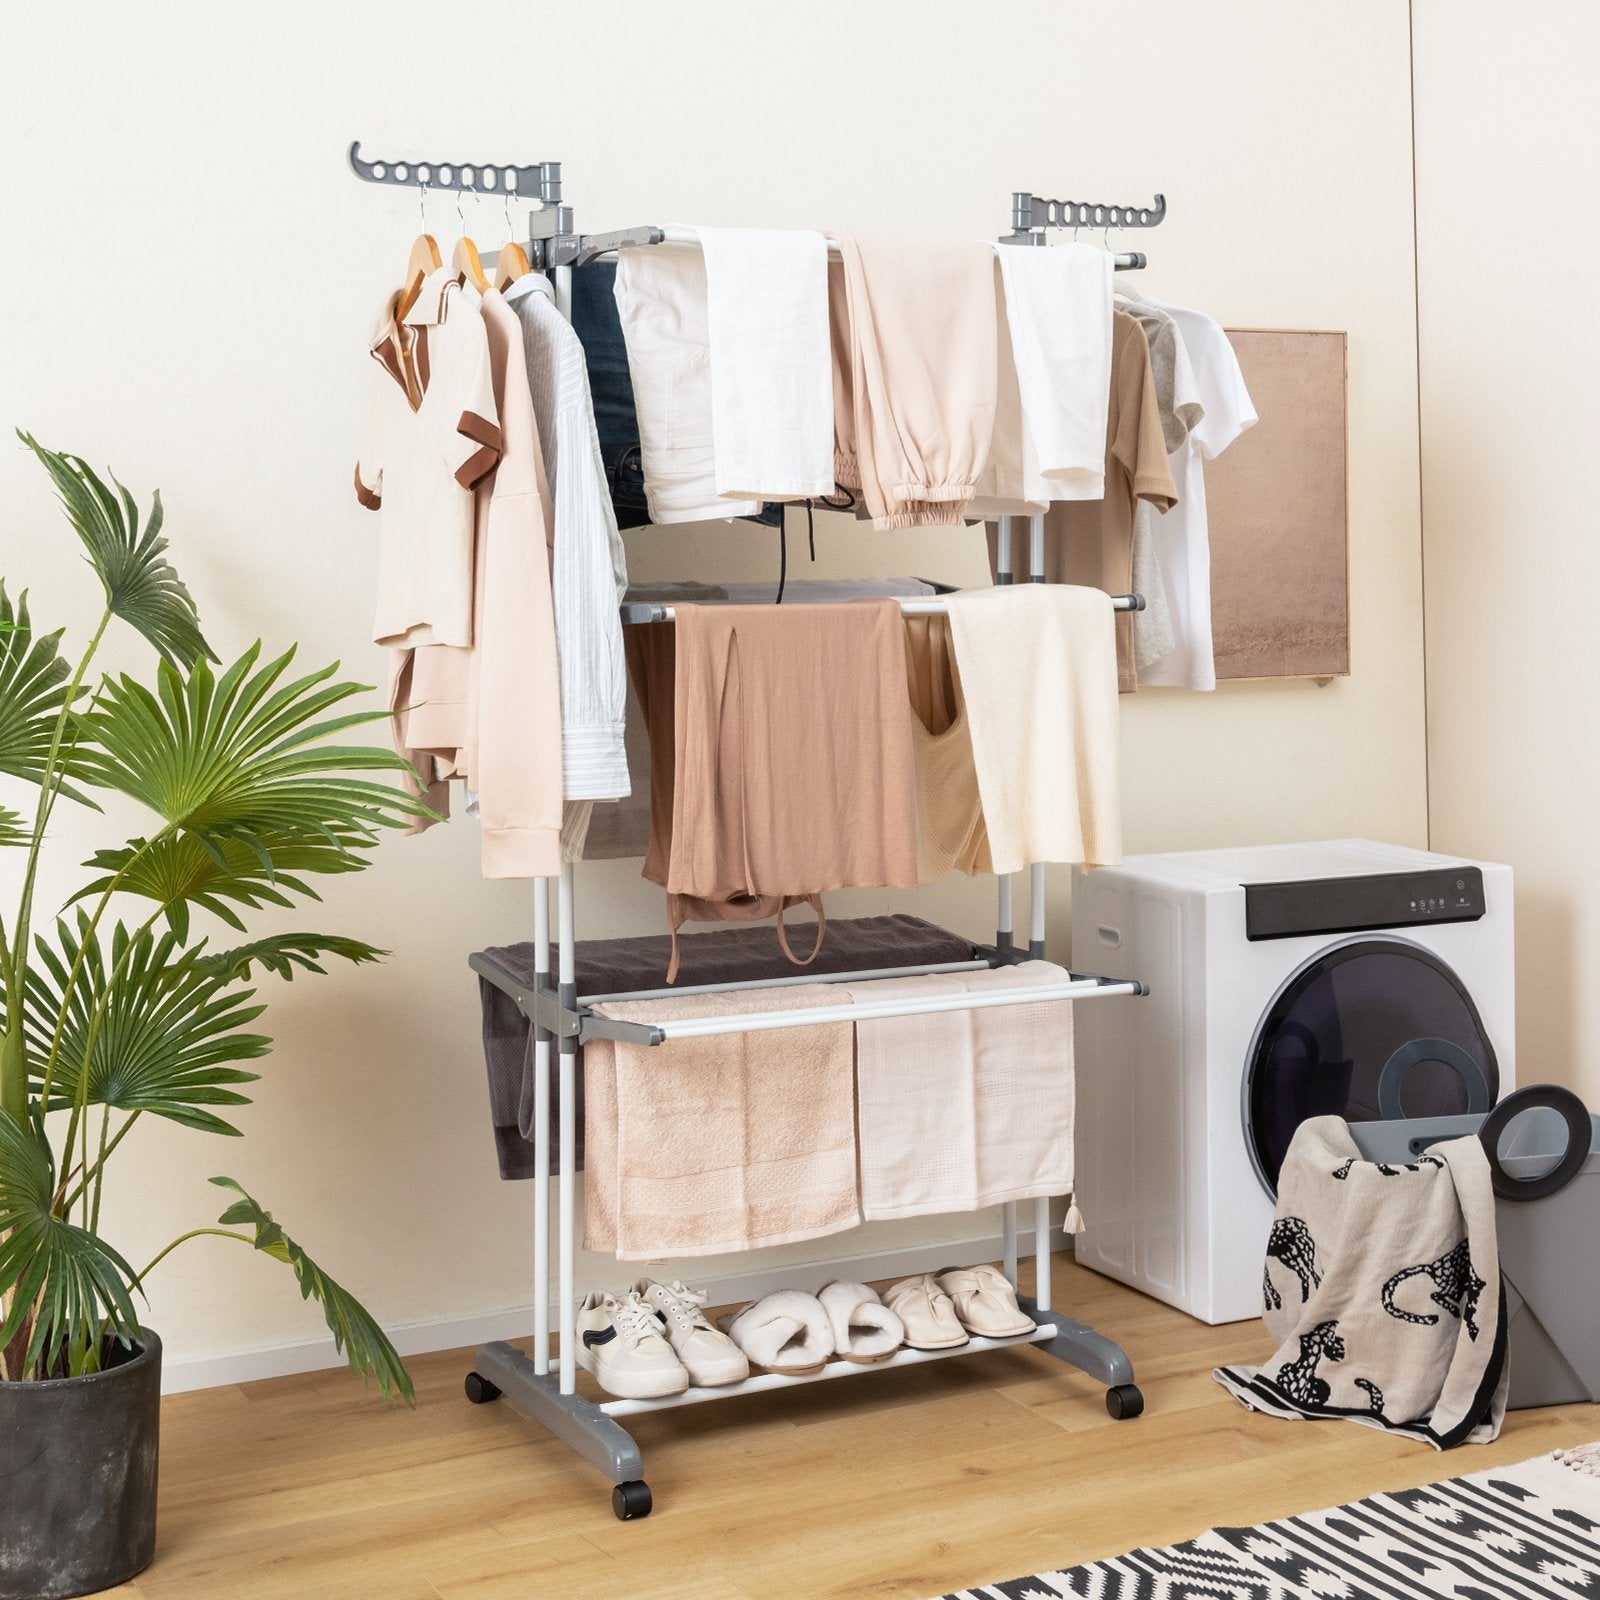 4-tier Clothes Drying Rack with Rotatable Side Wings and Collapsible Shelves, Gray - Gallery Canada